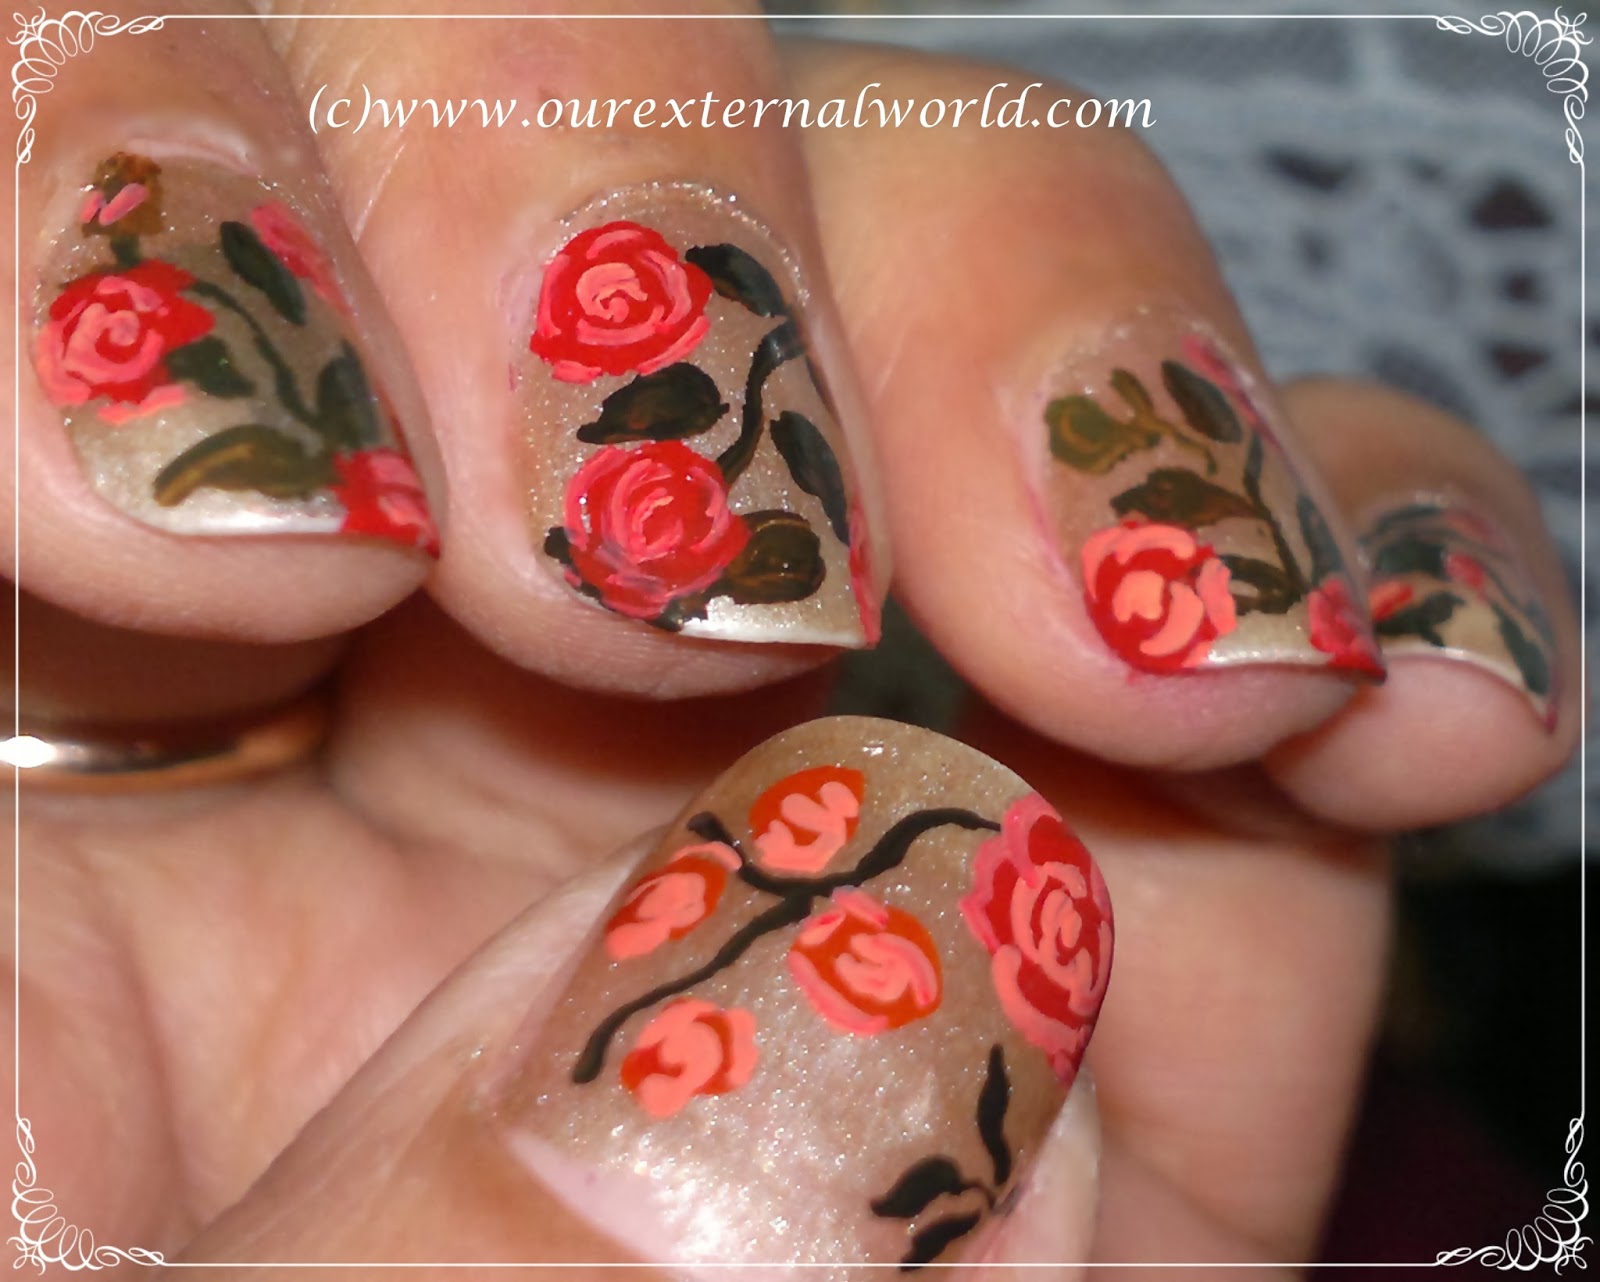 7. Gorgeous Rose Nail Art Designs to Try - wide 4